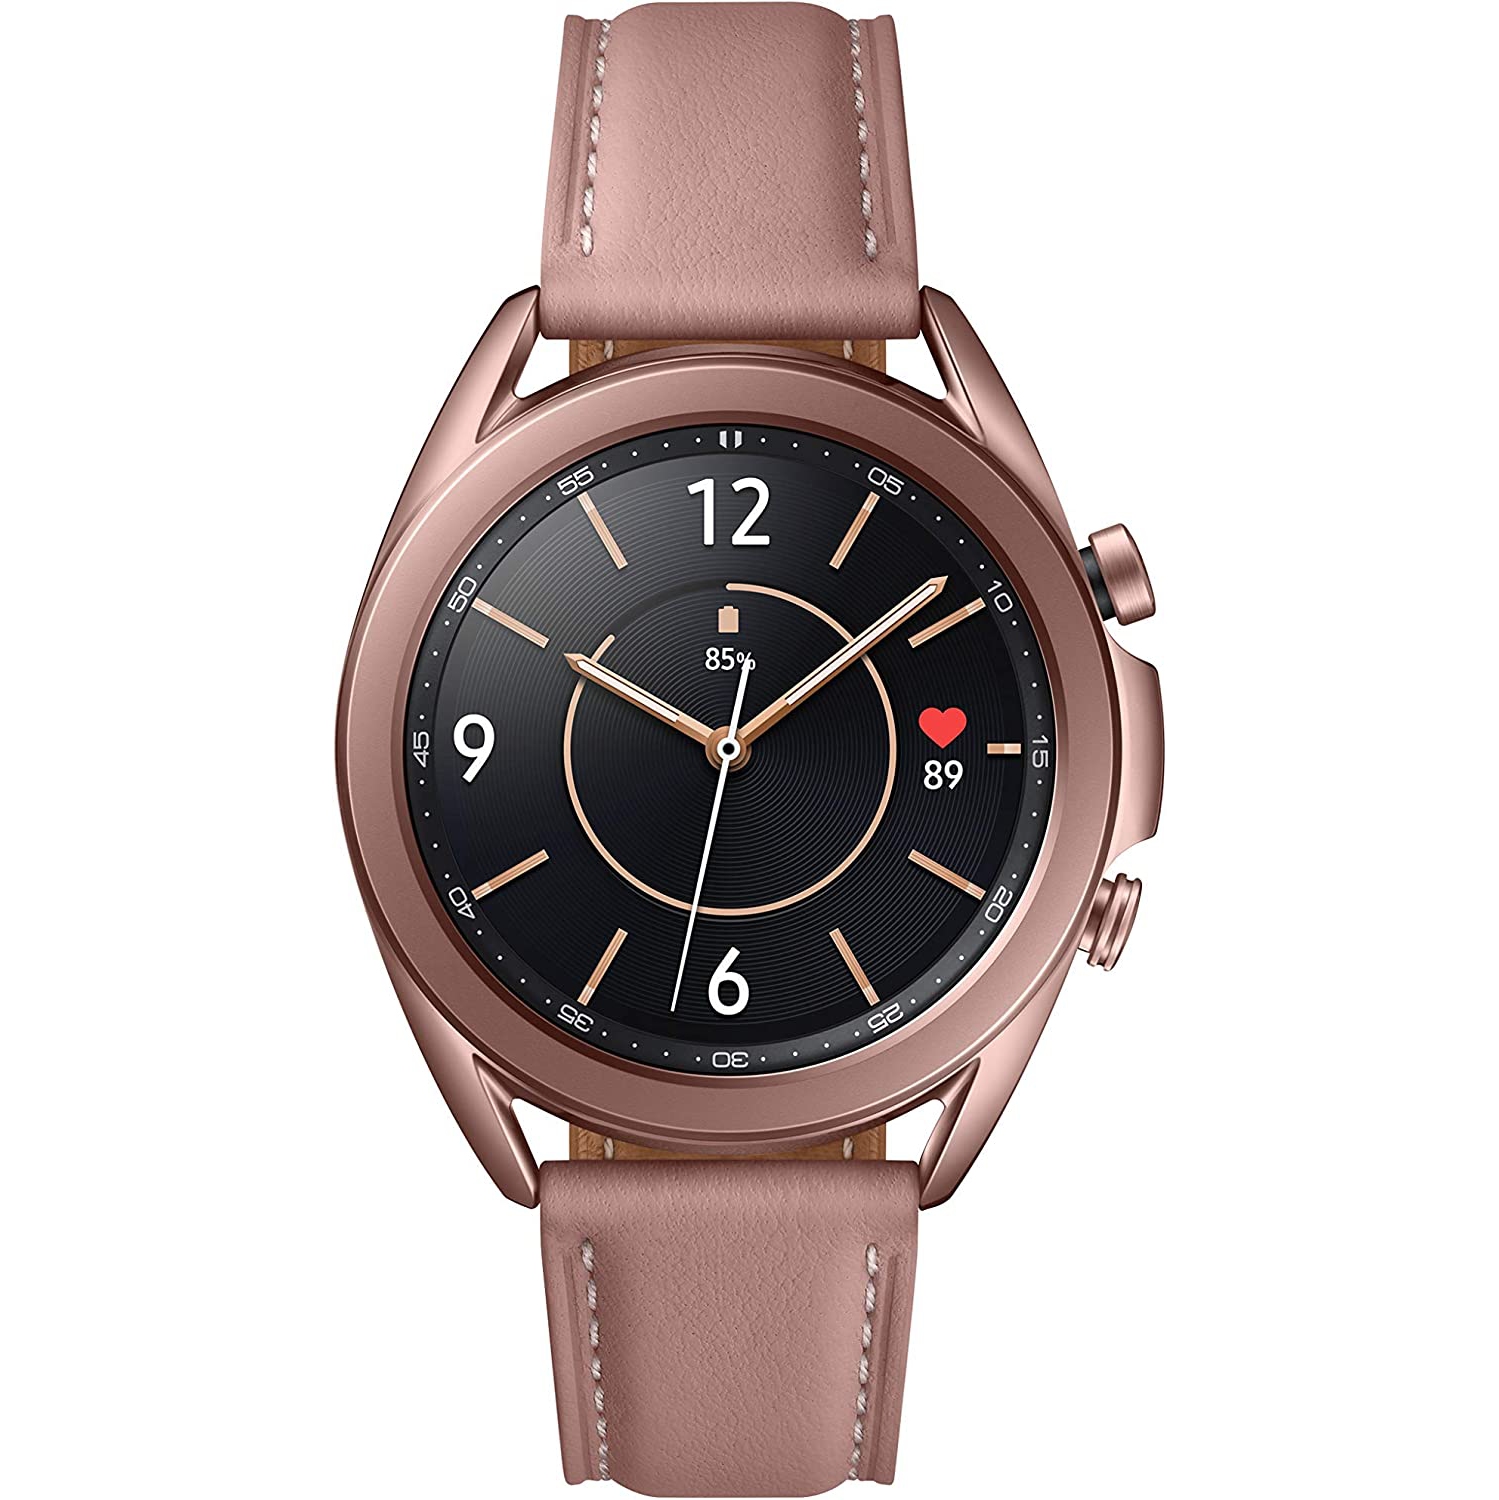 Samsung Galaxy Watch 3 (GPS, 41MM) - Mystic Bronze Smartwatch with Leather Band SM-R850 - Certified Refurbished